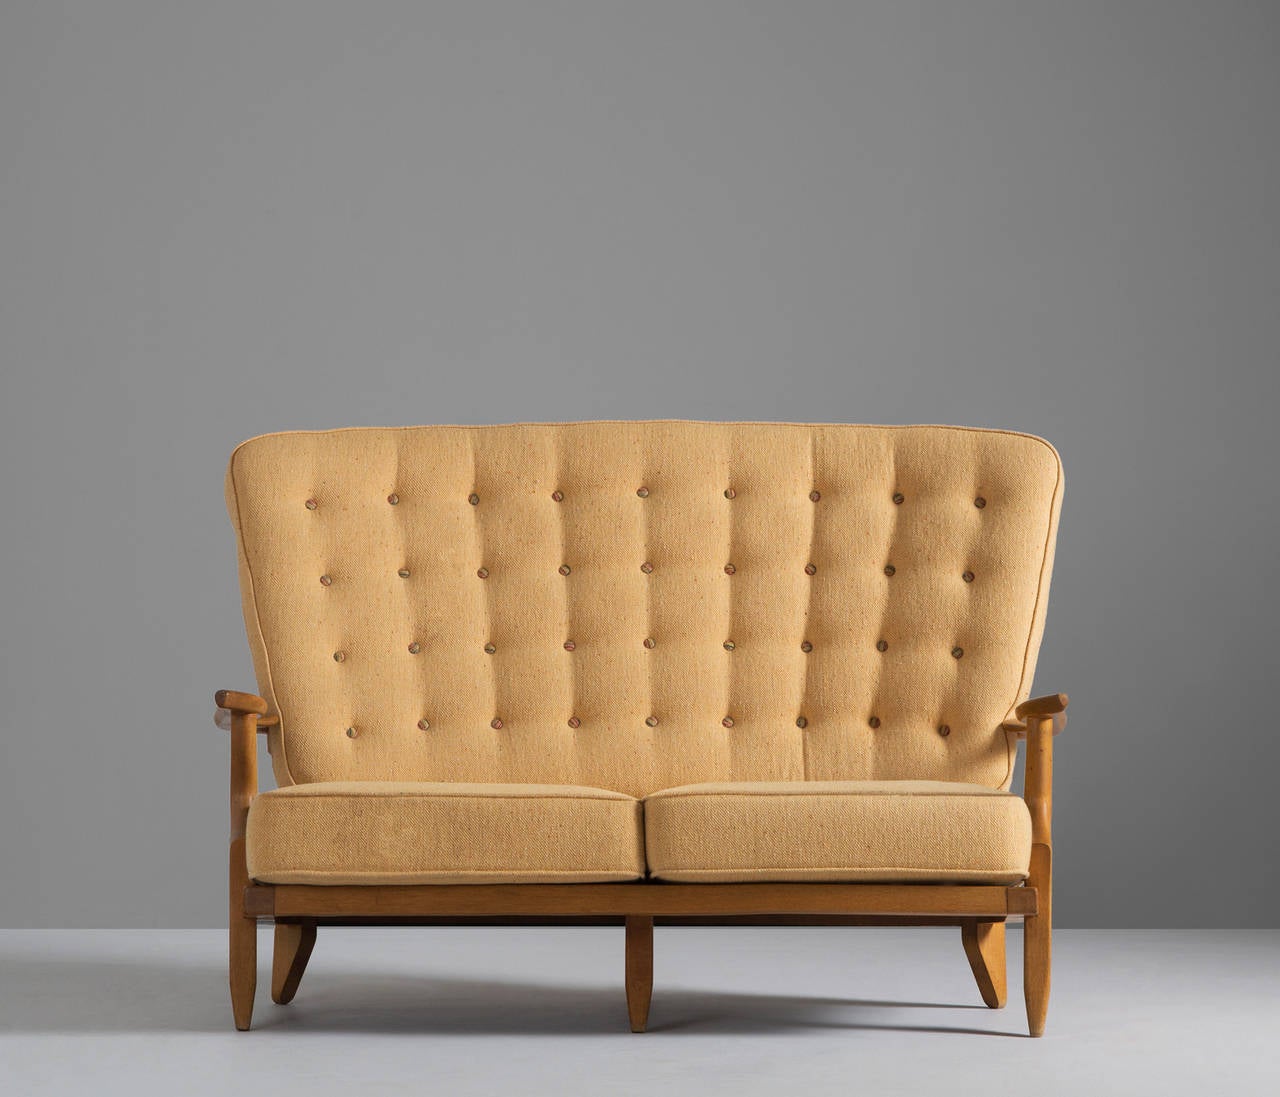 Extraordinary high back sofa in it's original upholstery by French designers Guillerme et Chambron. 

The sofa shows a variety of stunning shapes and well design lines, such as the armrest and the elegant bars in the back the